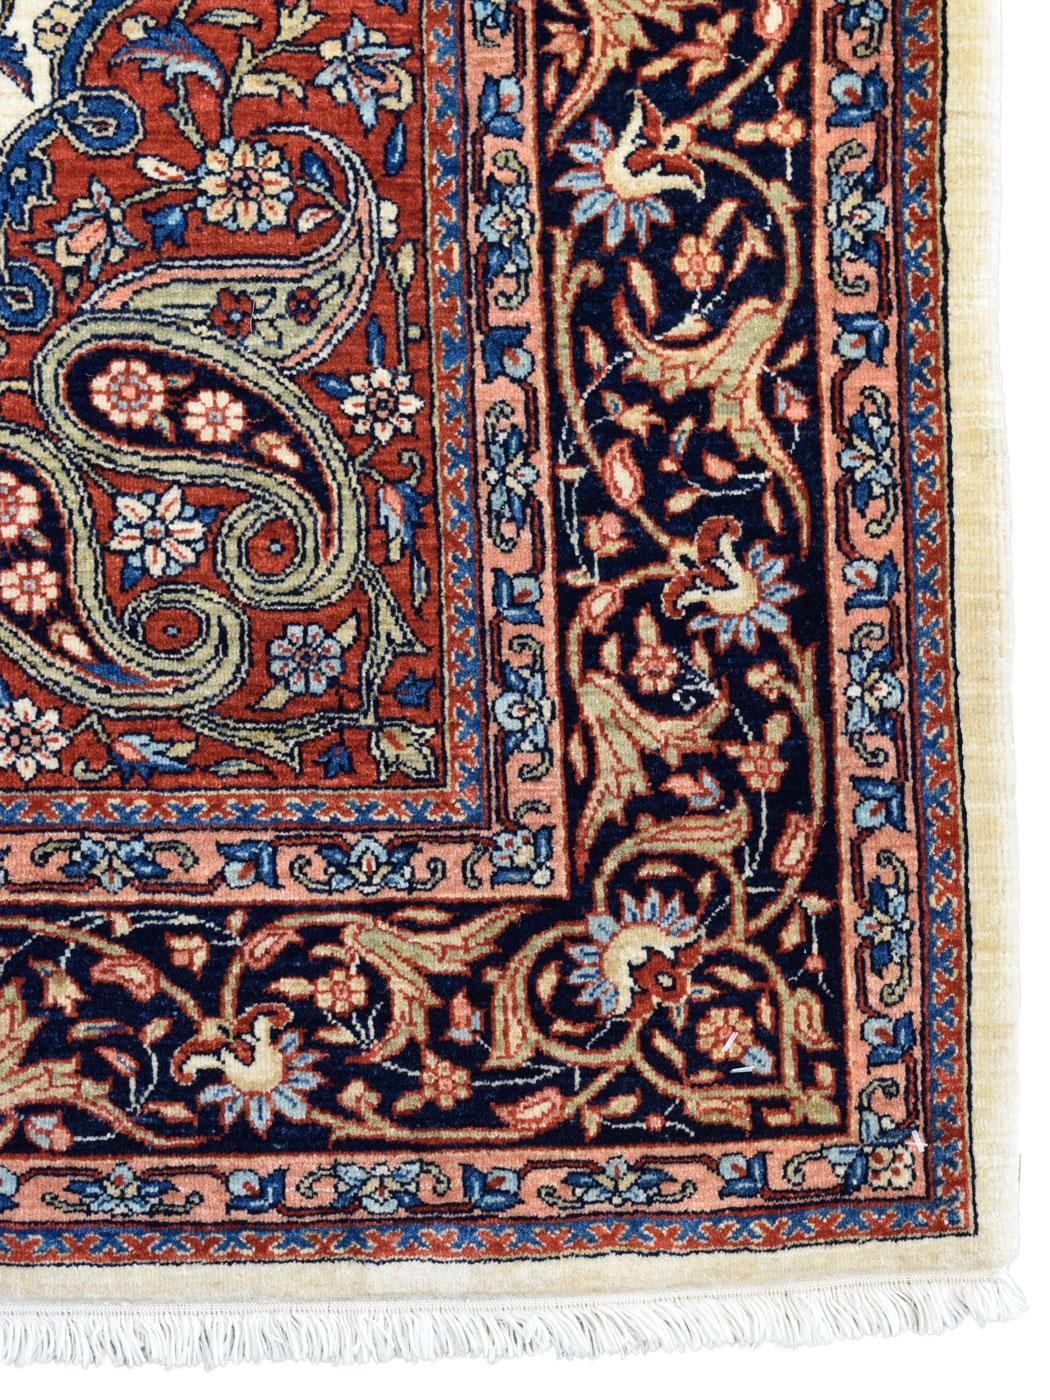 Hand-Knotted Pure Wool Blue, Red, and Cream Mohtashan Persian Rug, 5' x 7' For Sale